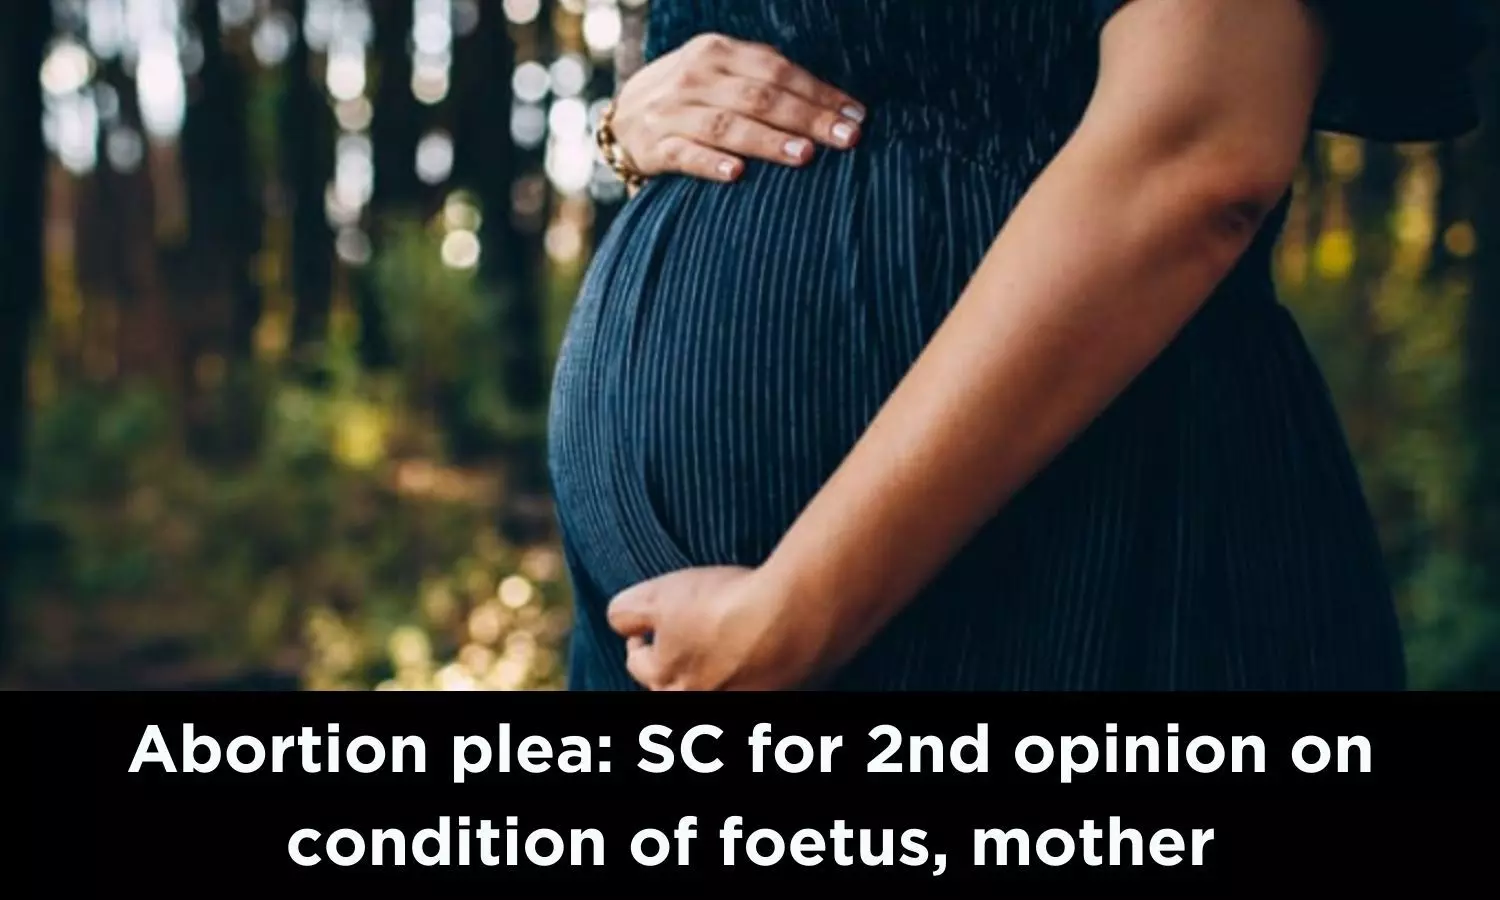 Abortion plea: SC seeks fresh report from AIIMS medical board on unborn child condition, woman mental state